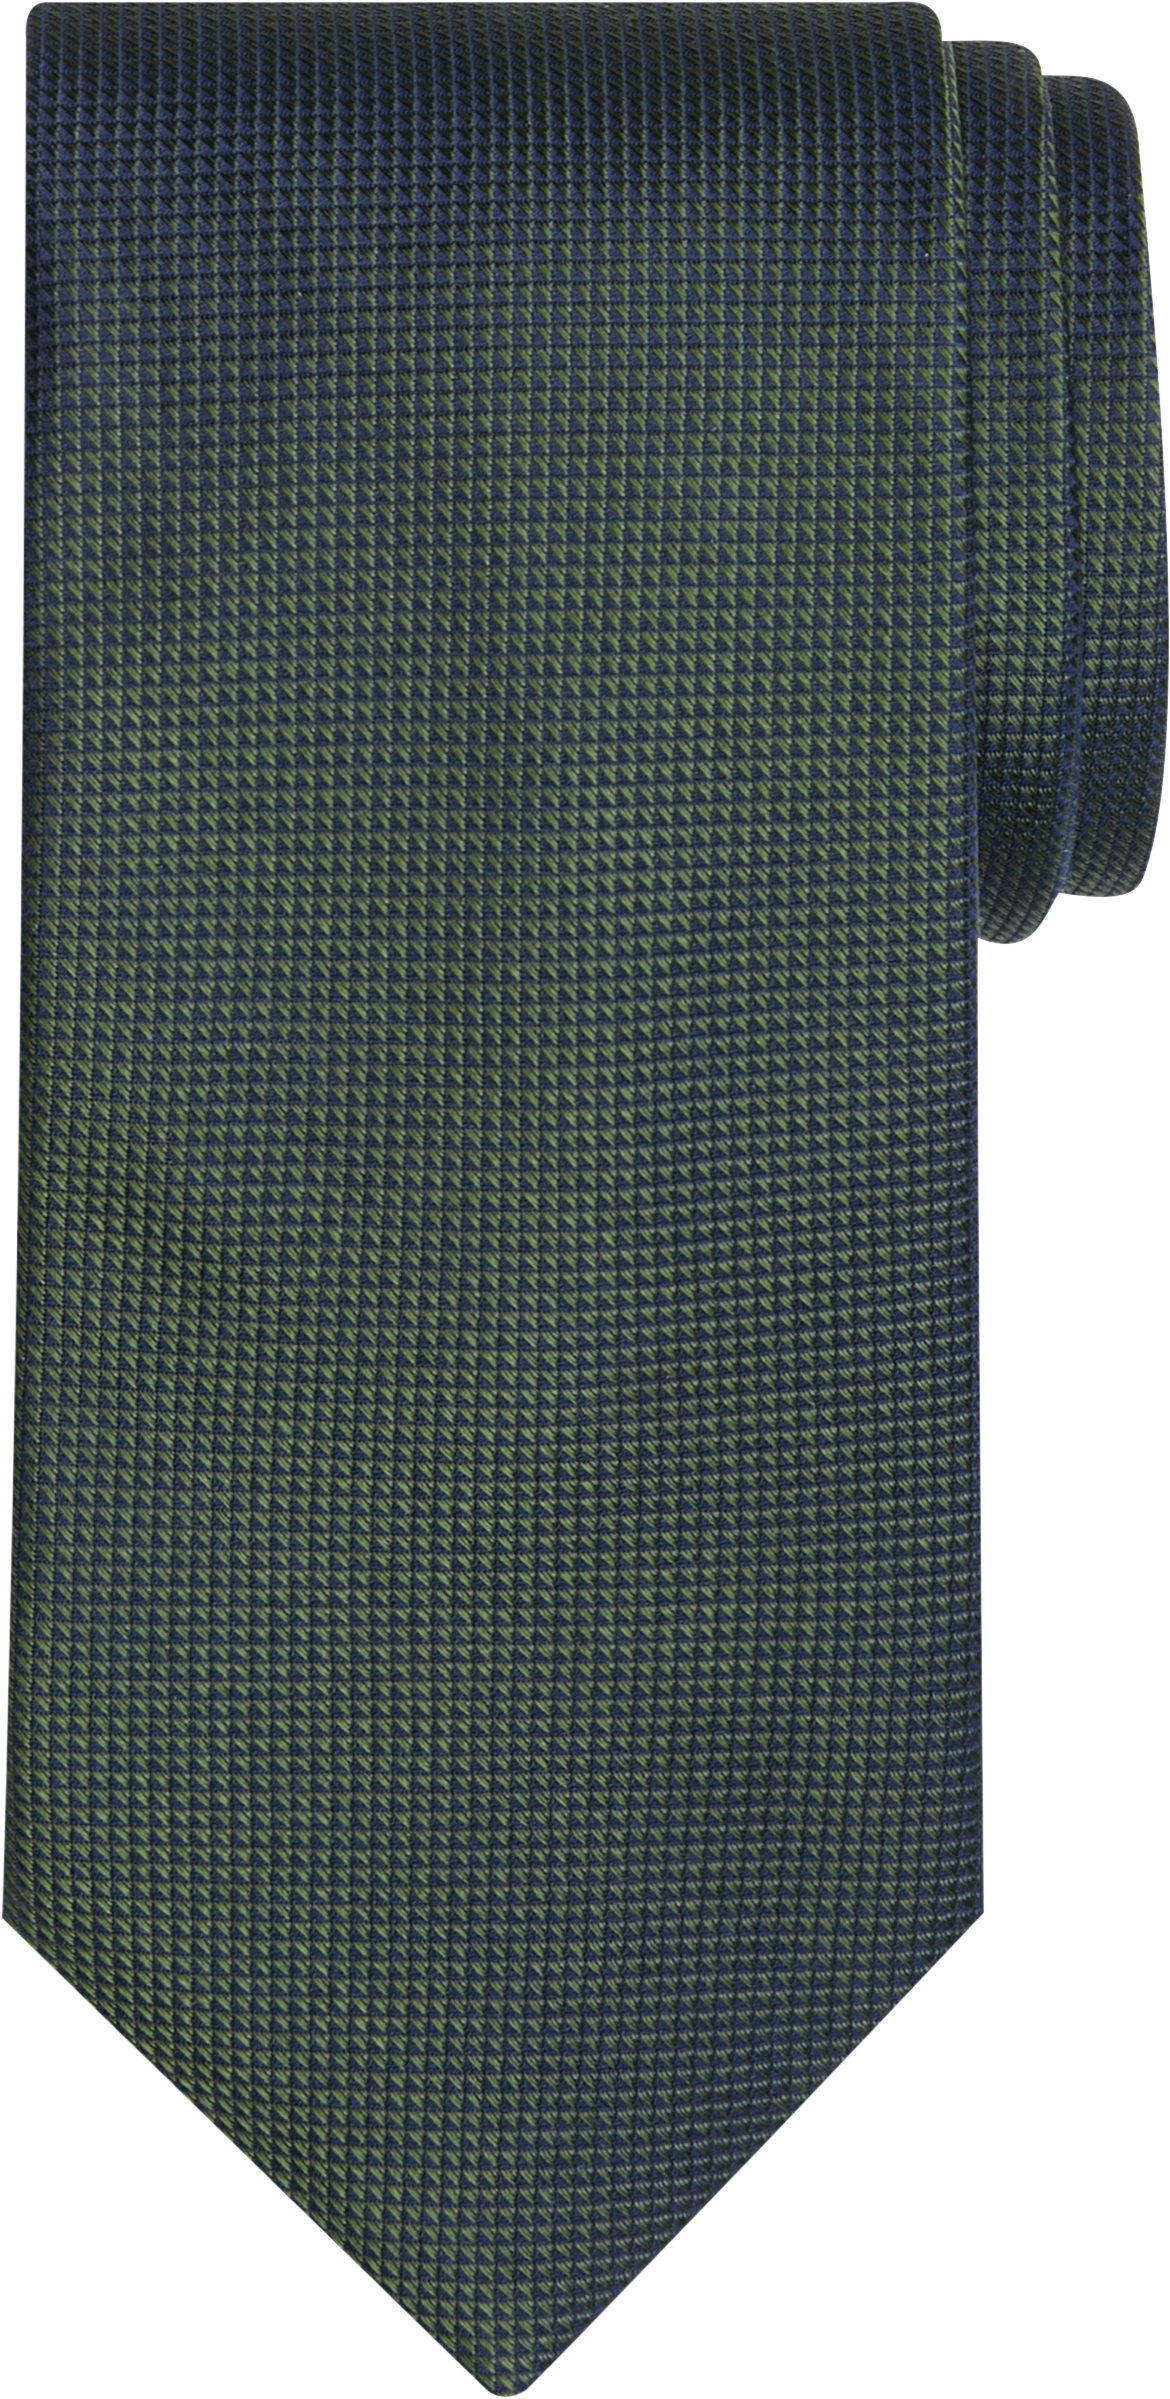 Pronto Uomo Men's Pocket Square Taupe - Size: One Size - Only Available at Men’s Wearhouse